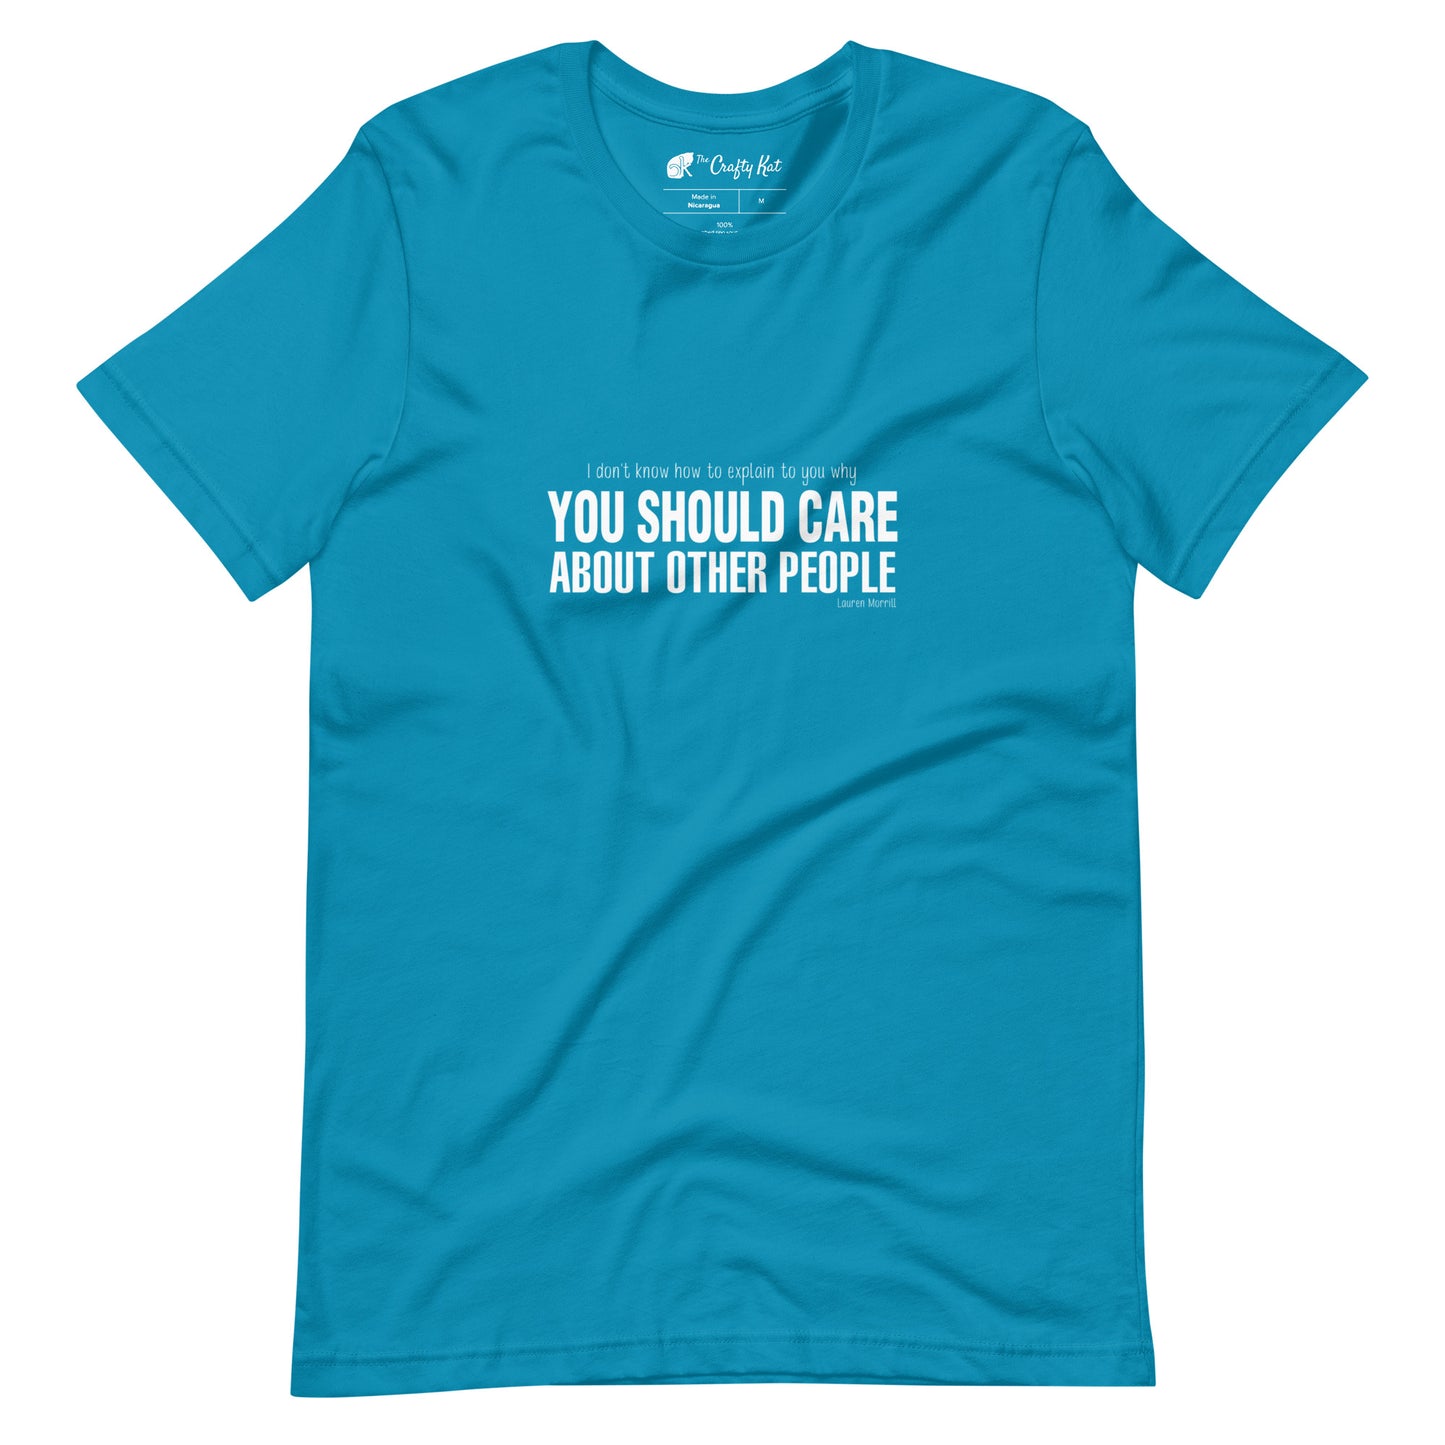 Aqua (cyan) t-shirt with quote by Lauren Morrill: "I don't know how to explain to you why YOU SHOULD CARE ABOUT OTHER PEOPLE"